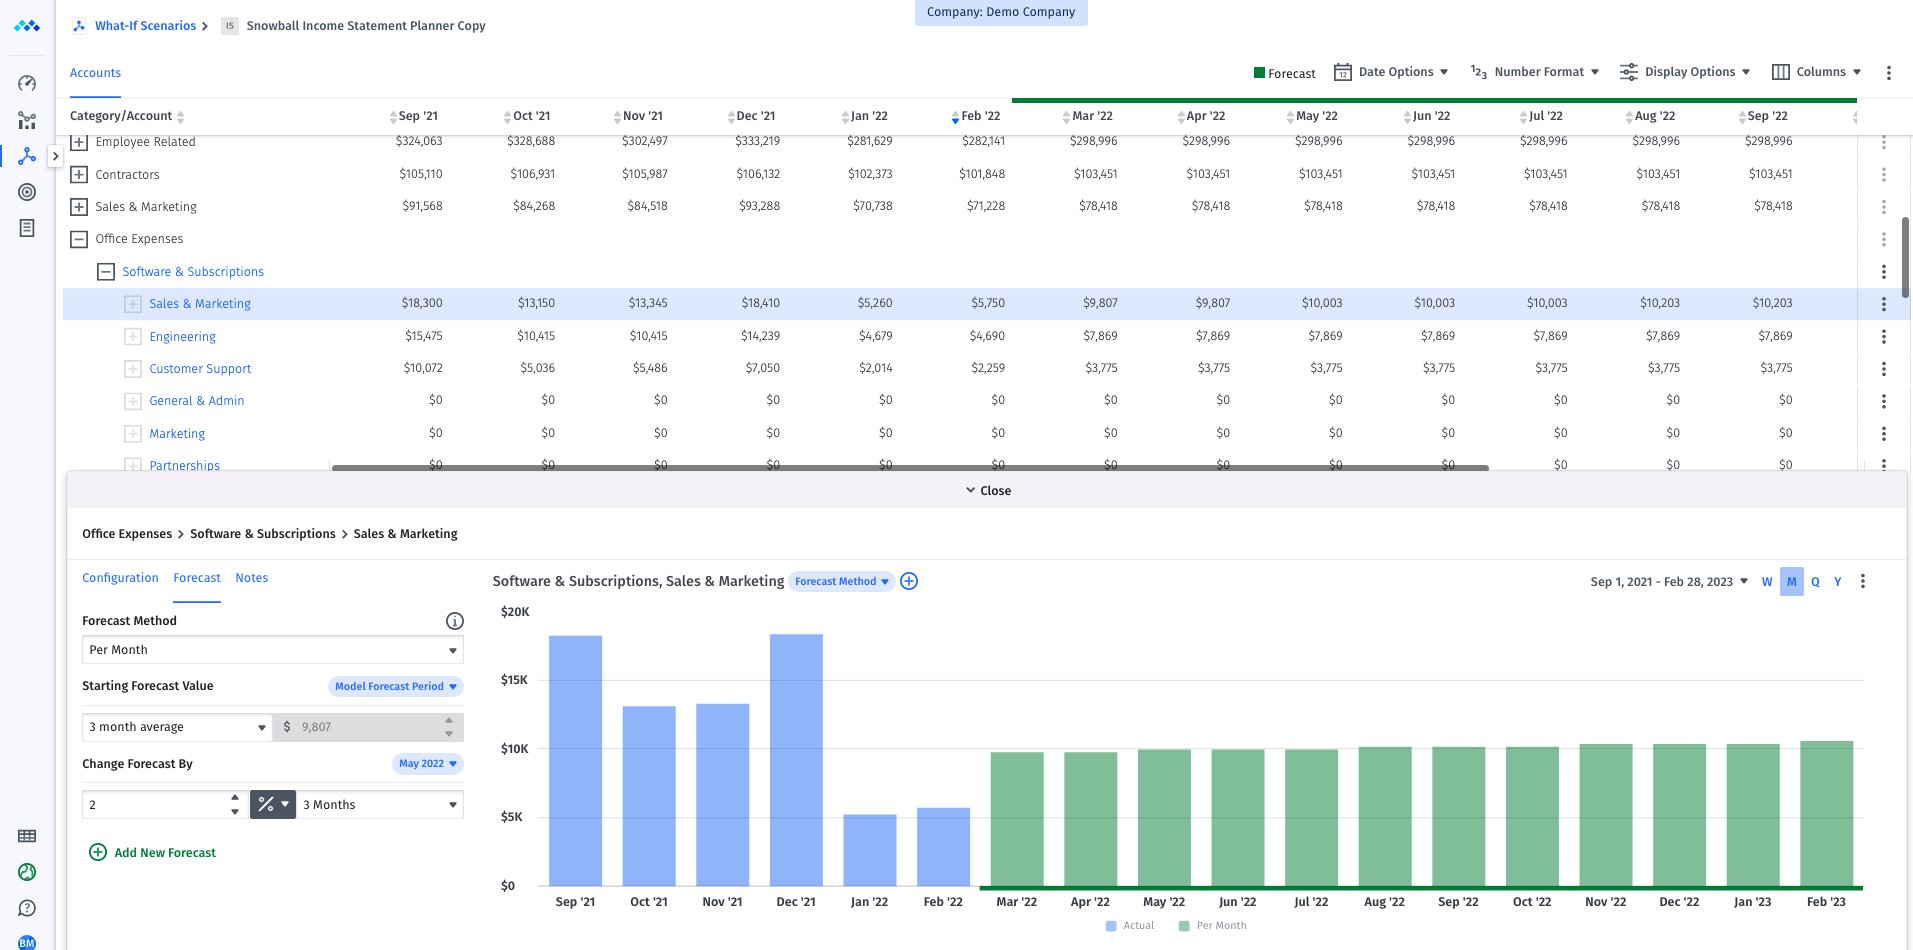 Mosaic Software - Financial Modeling - Income Statement Planner